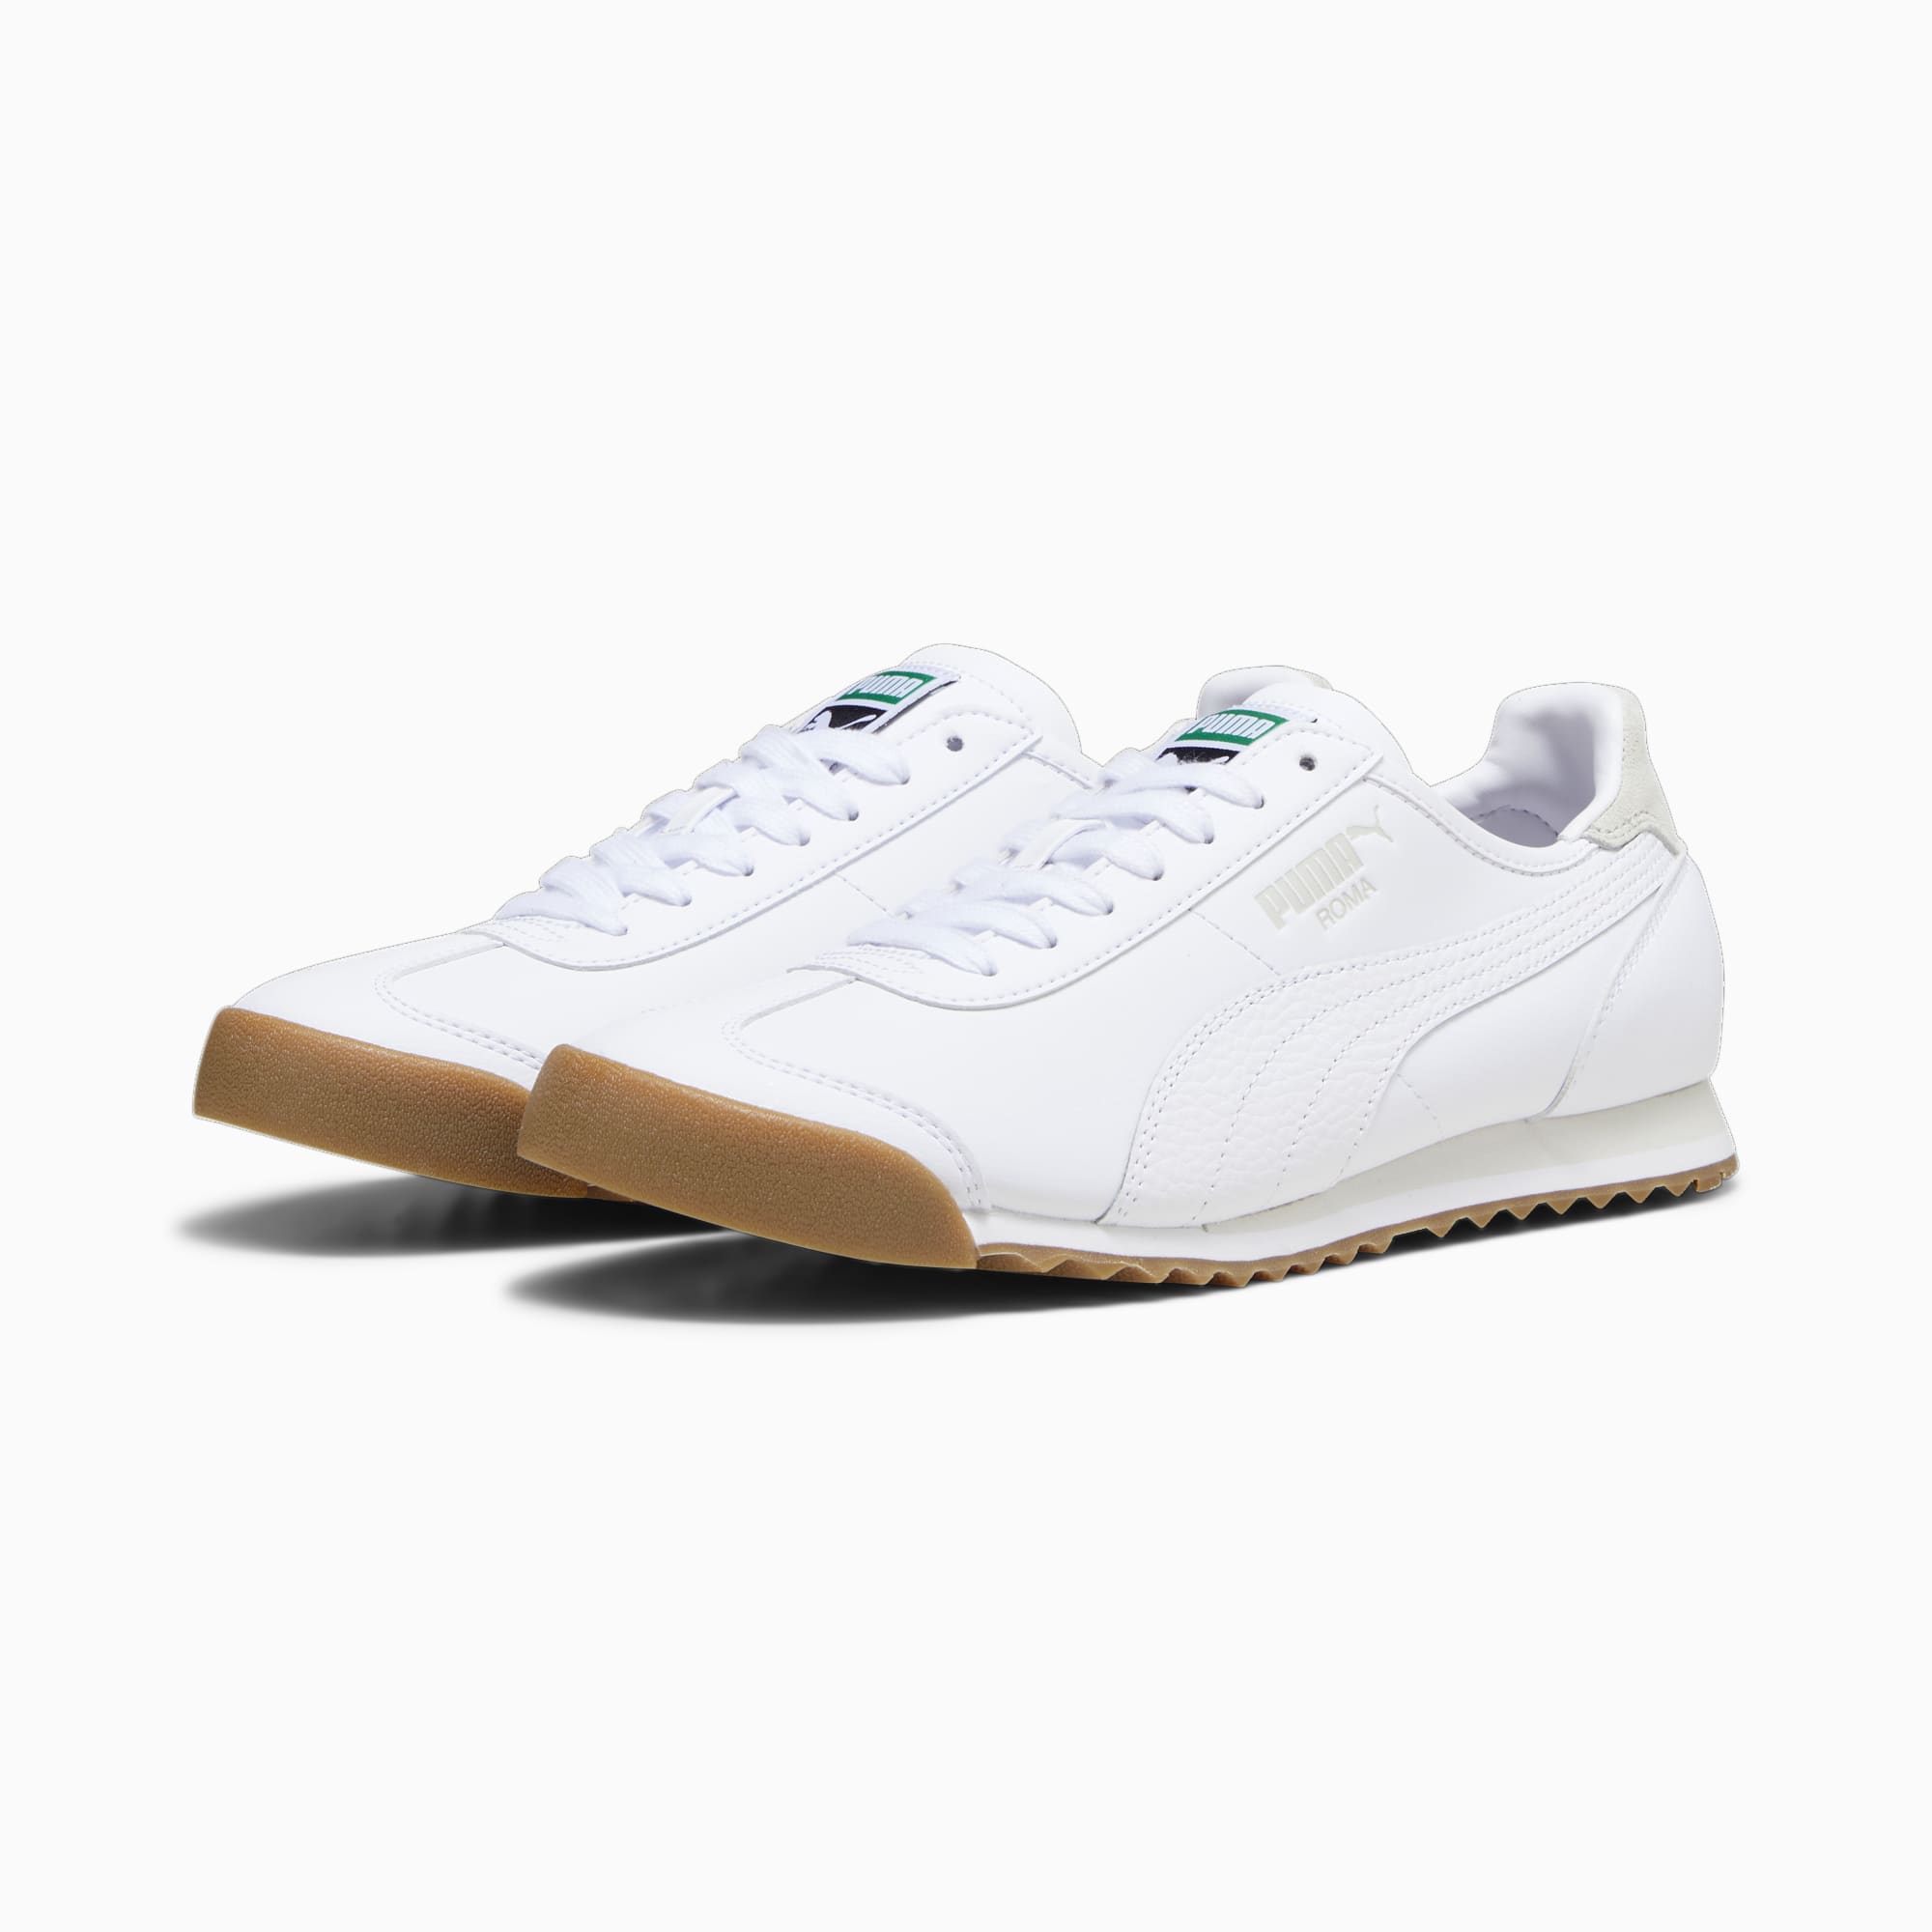 PUMA Chaussure Sneakers Roma OG Lth, Blanc/Gris